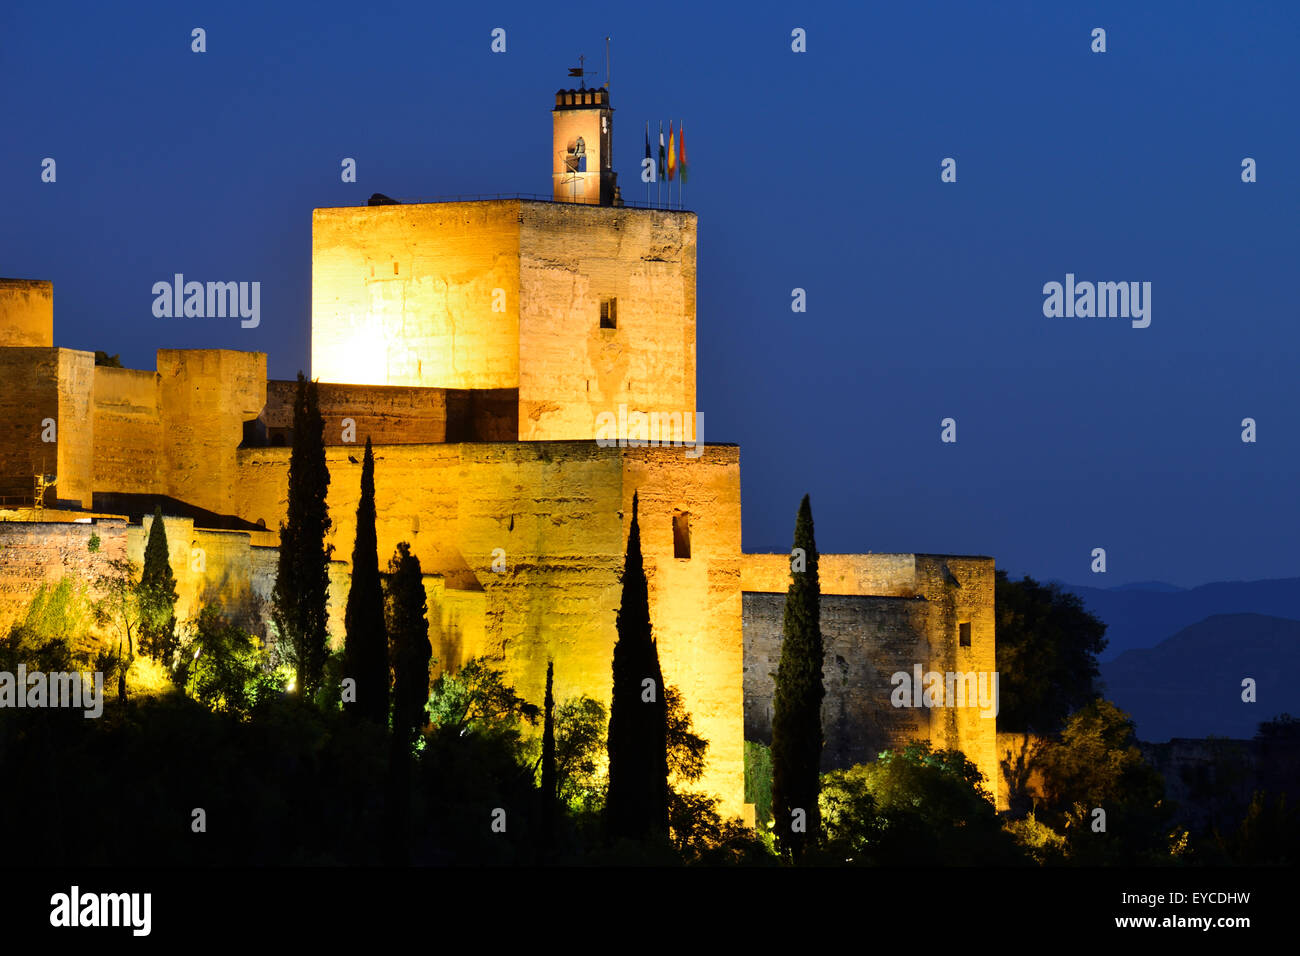 View of Alcazaba towers at dusk within the Alhambra Palace complex in Granada, Andalusia, Spain Stock Photo